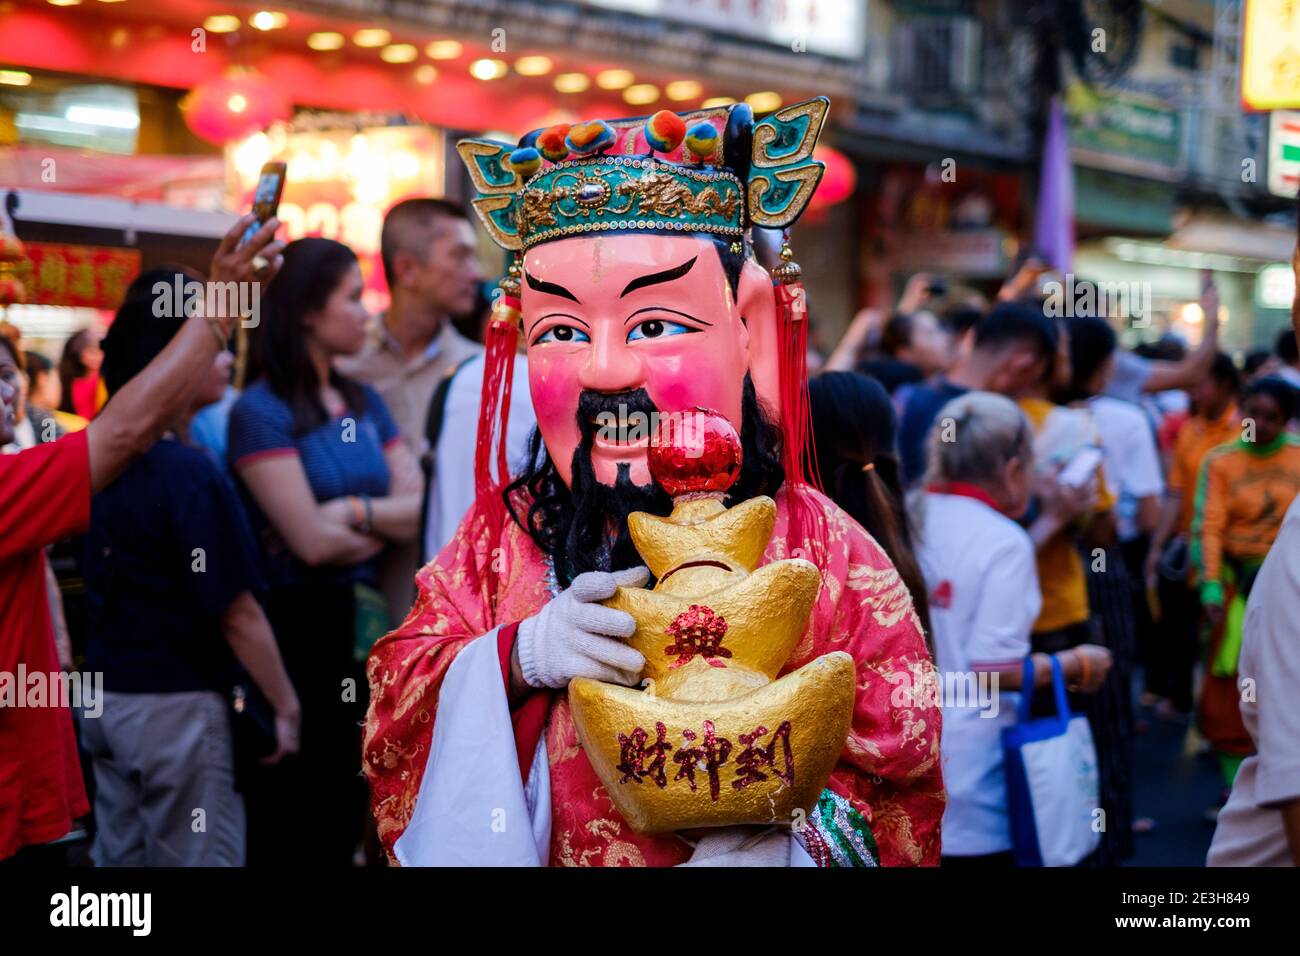 A mask at one of the parades during Chinese New Year festival in Bangkok. Thailand is home to the largest Chinese-descent community in SE Asia. Stock Photo